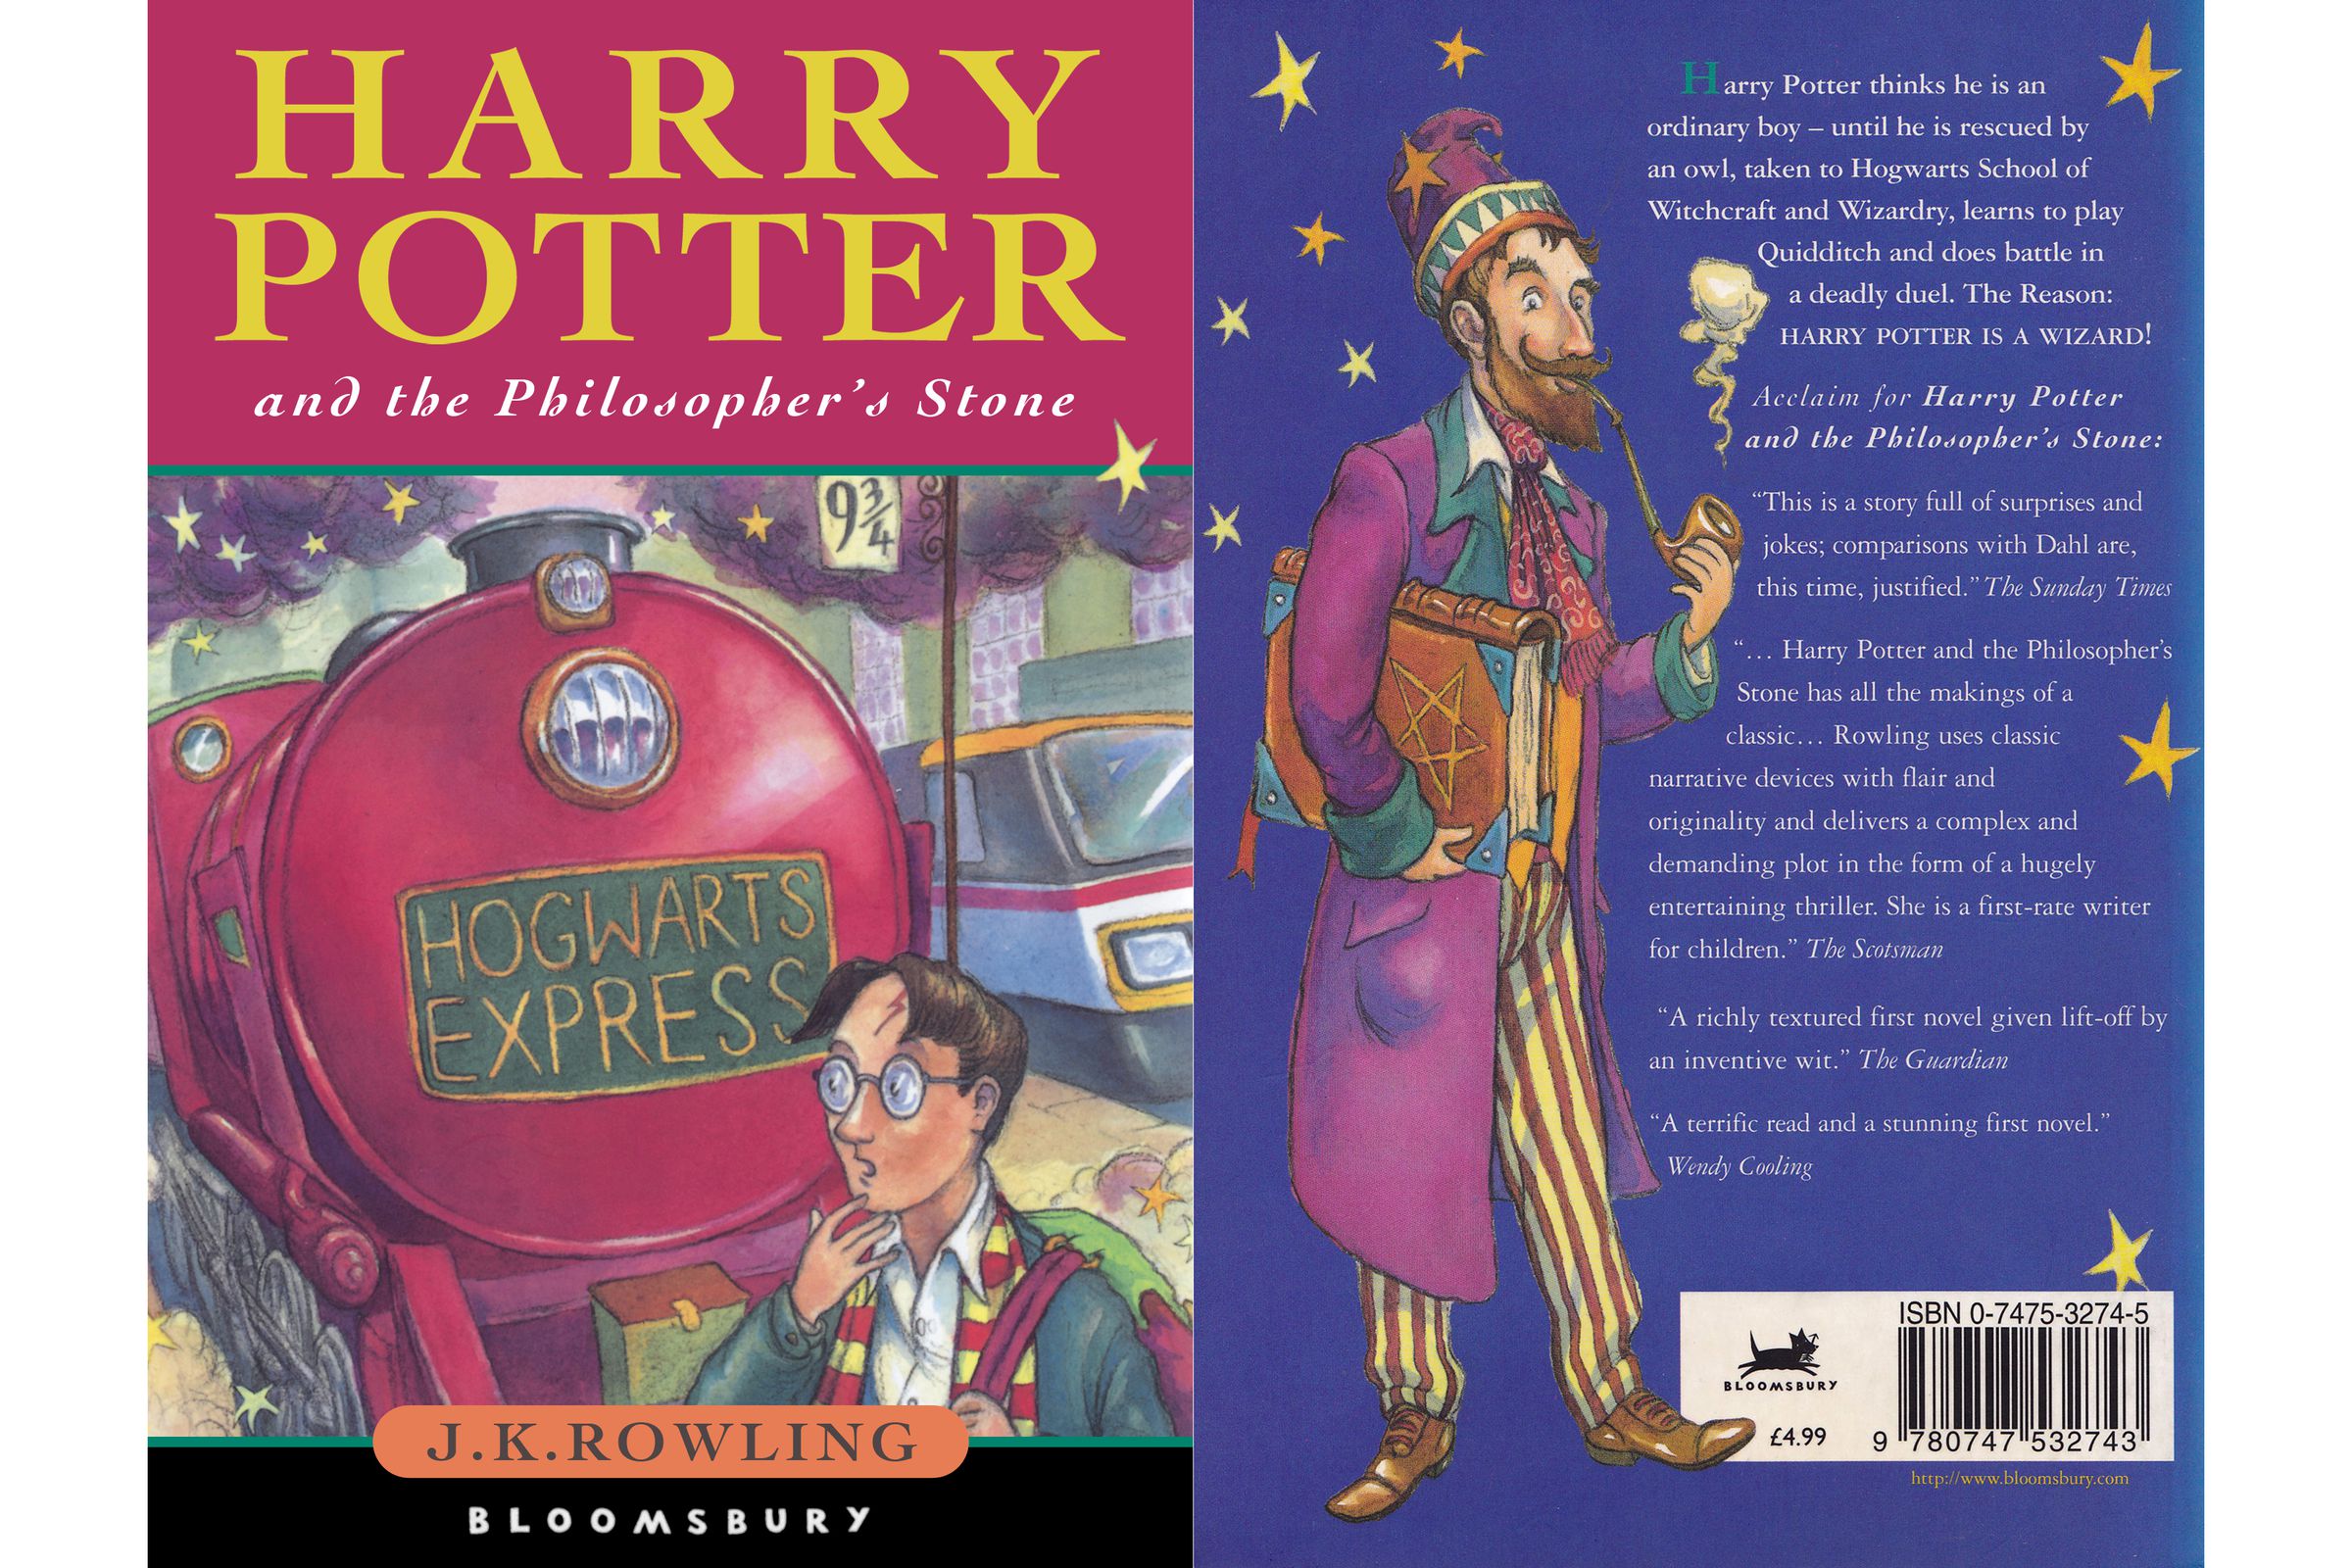 As well as featuring a typo on its back cover (not pictured) this edition of the book also includes a picture of a mystery wizard who never appeared in any of the stories.